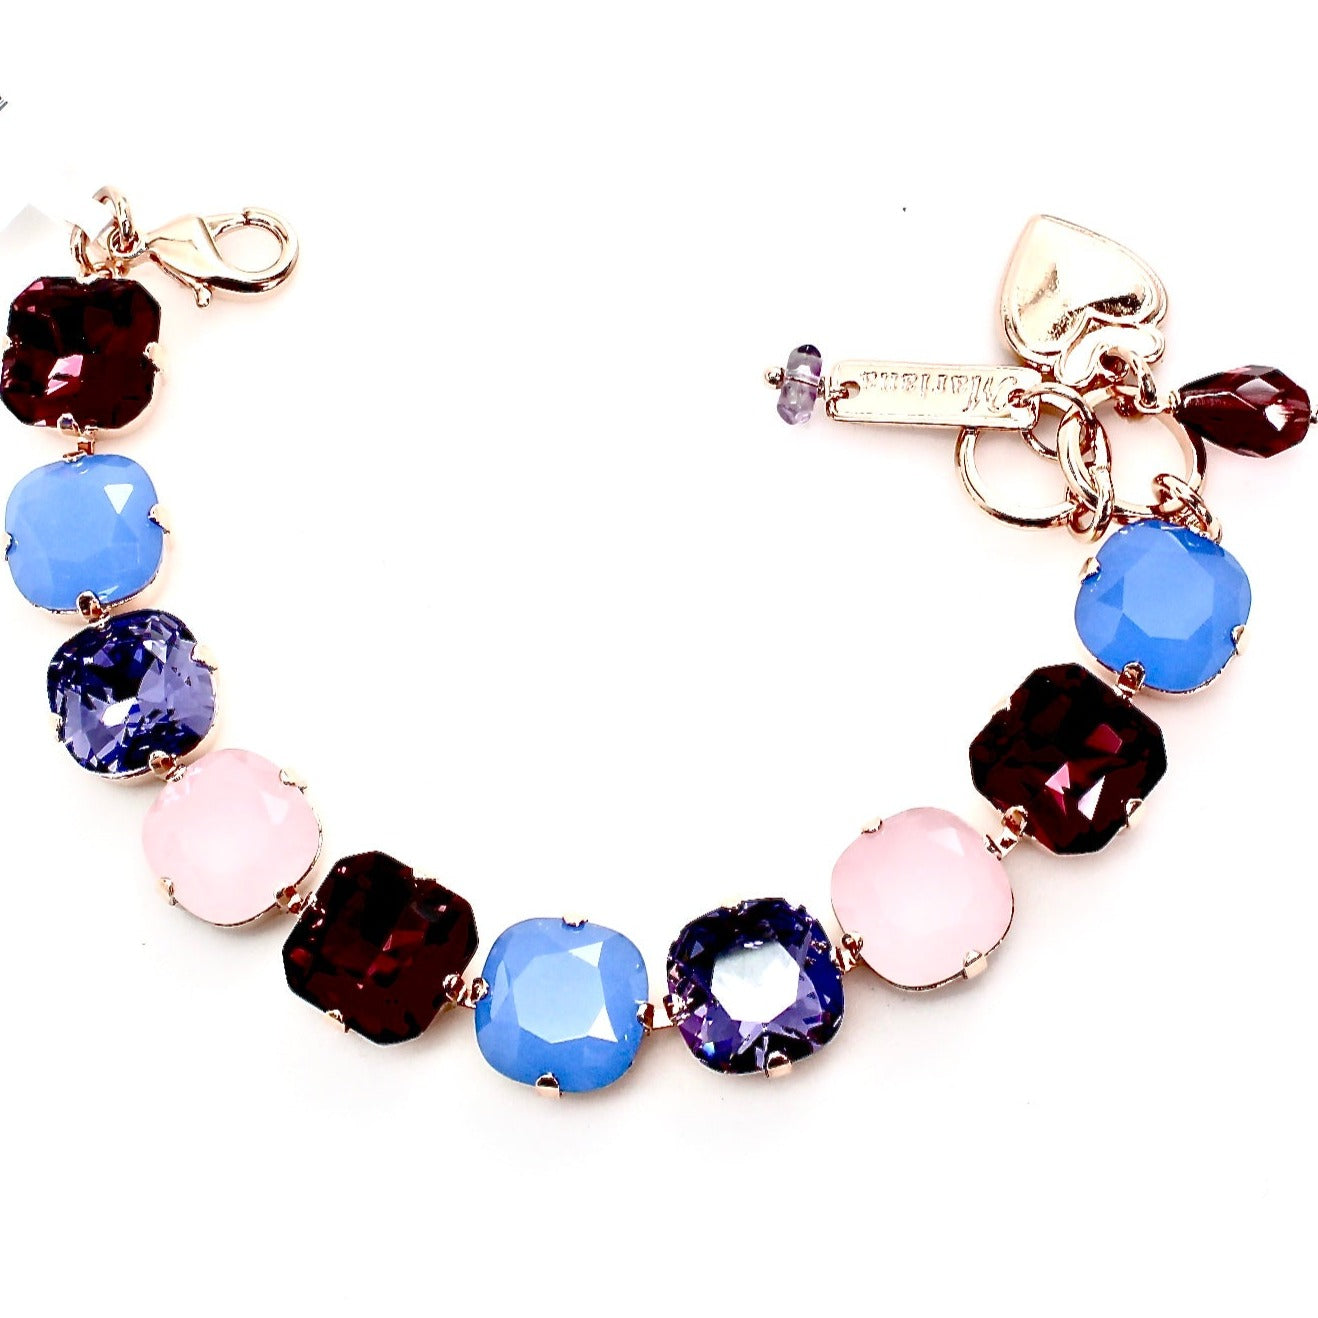 Peacock 12MM Square Crystal Bracelet in Rose Gold - MaryTyke's